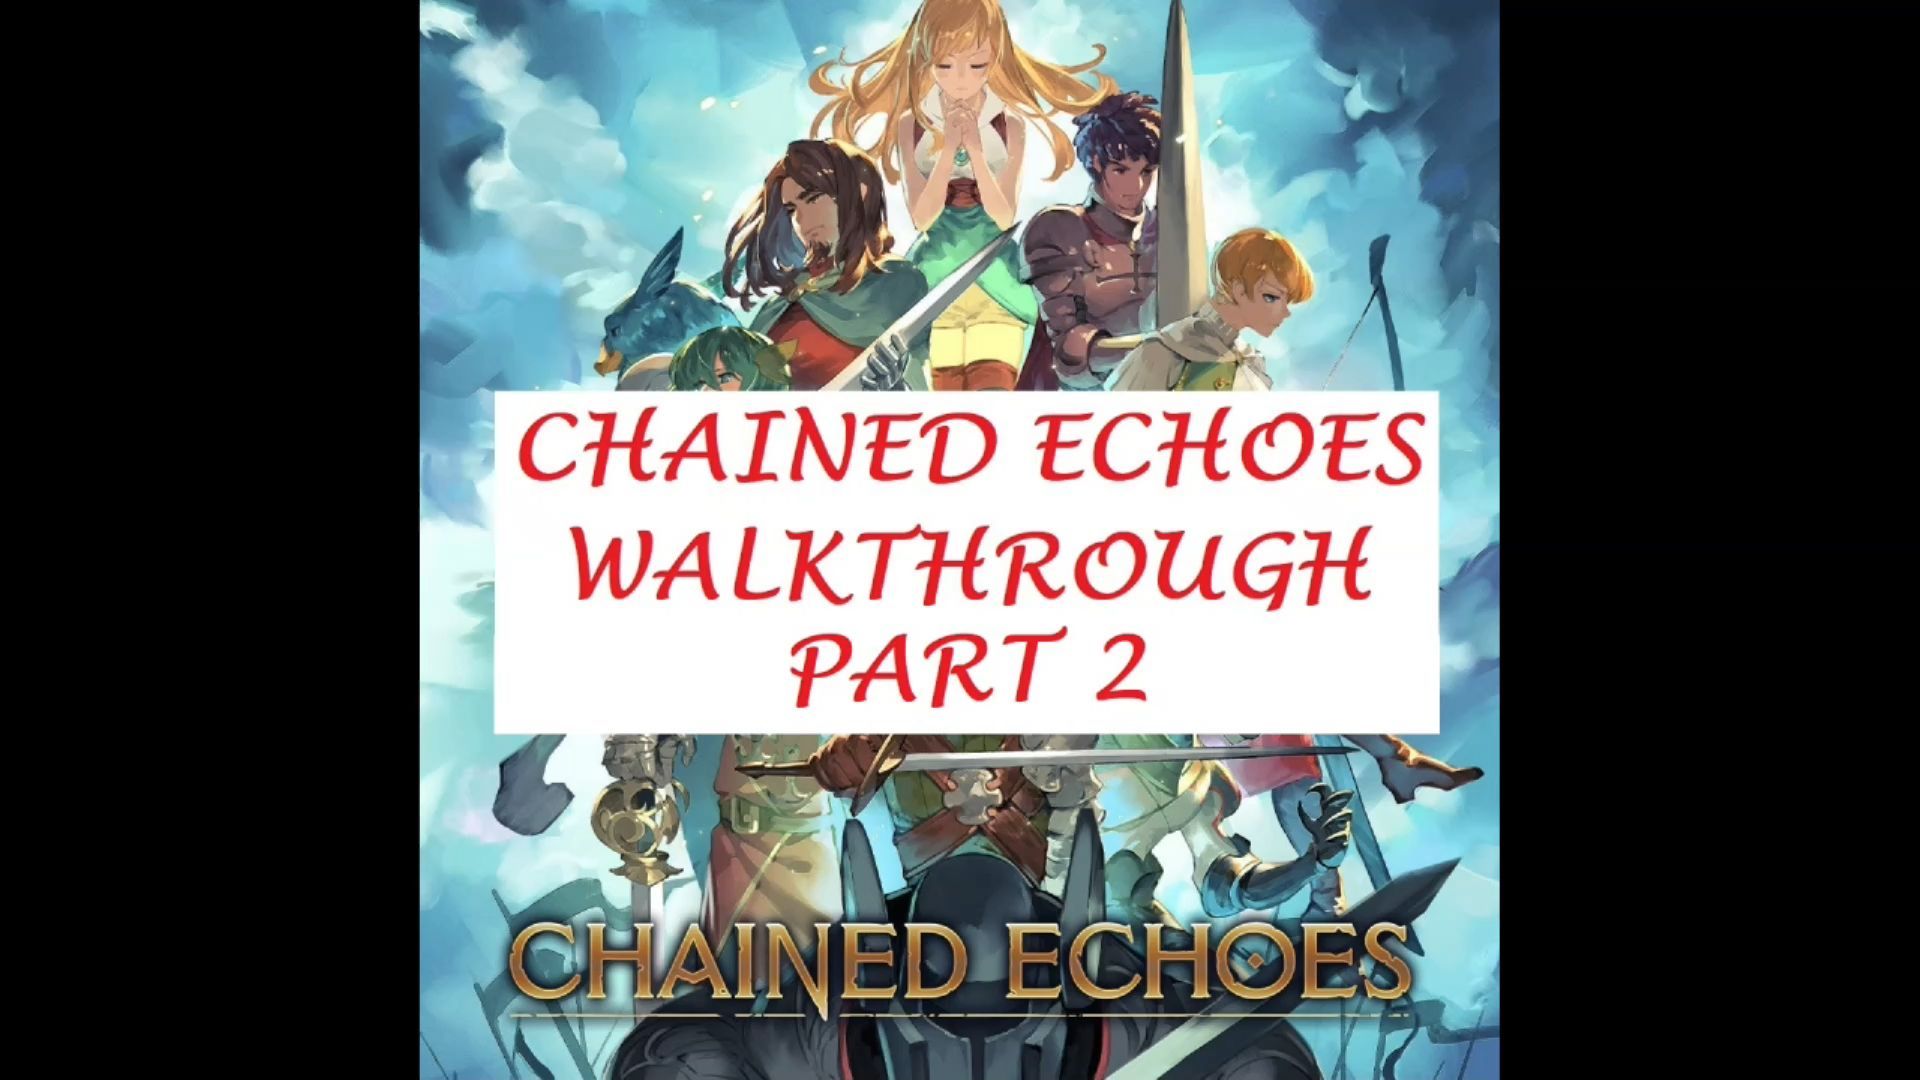 Chained Echoes Full Gameplay Walkthrough Part - 1 